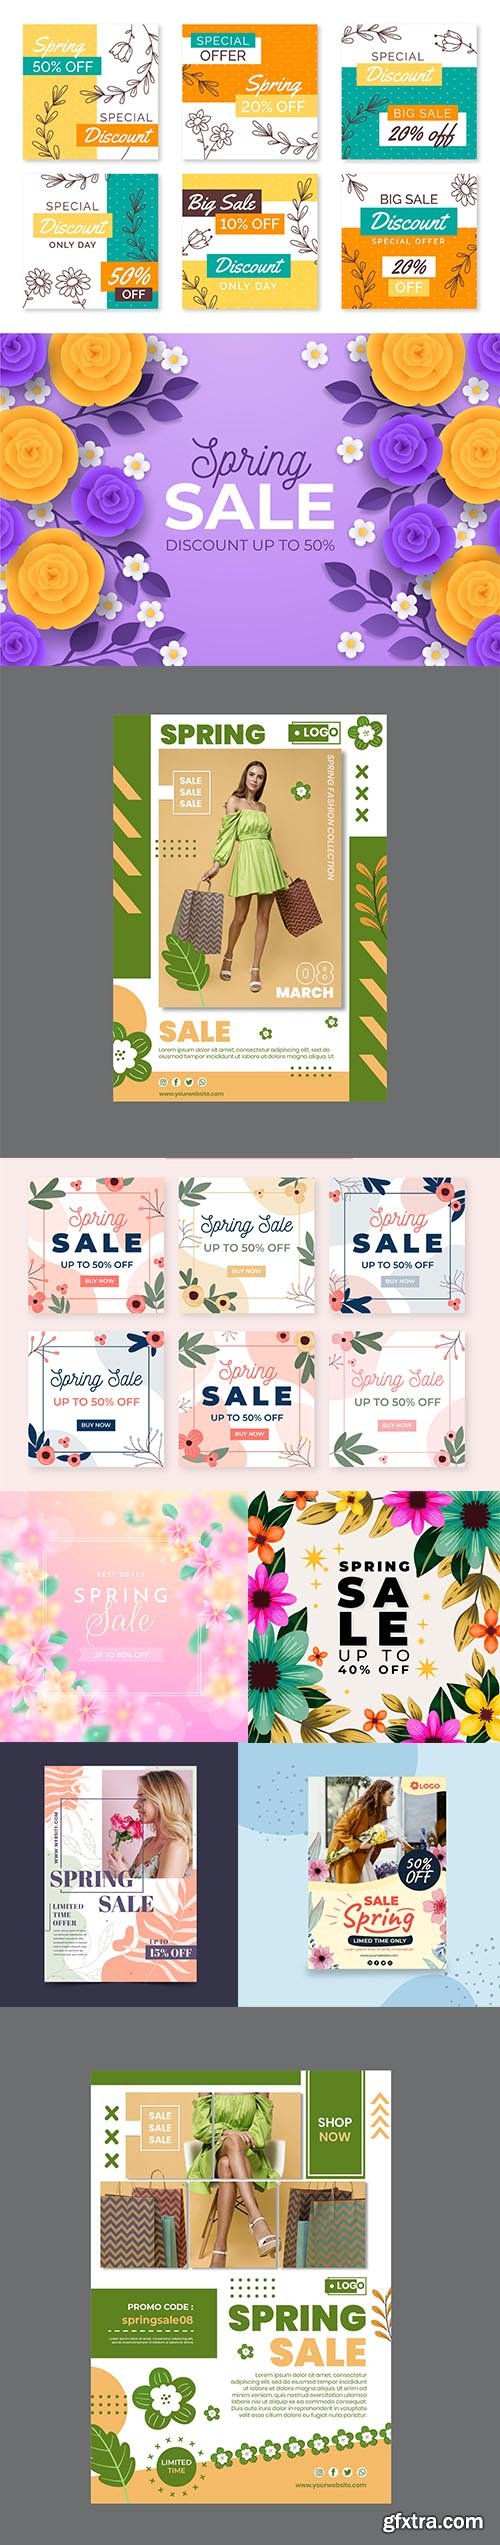 Hand-drawn Spring Sale Vector Collection vol 2